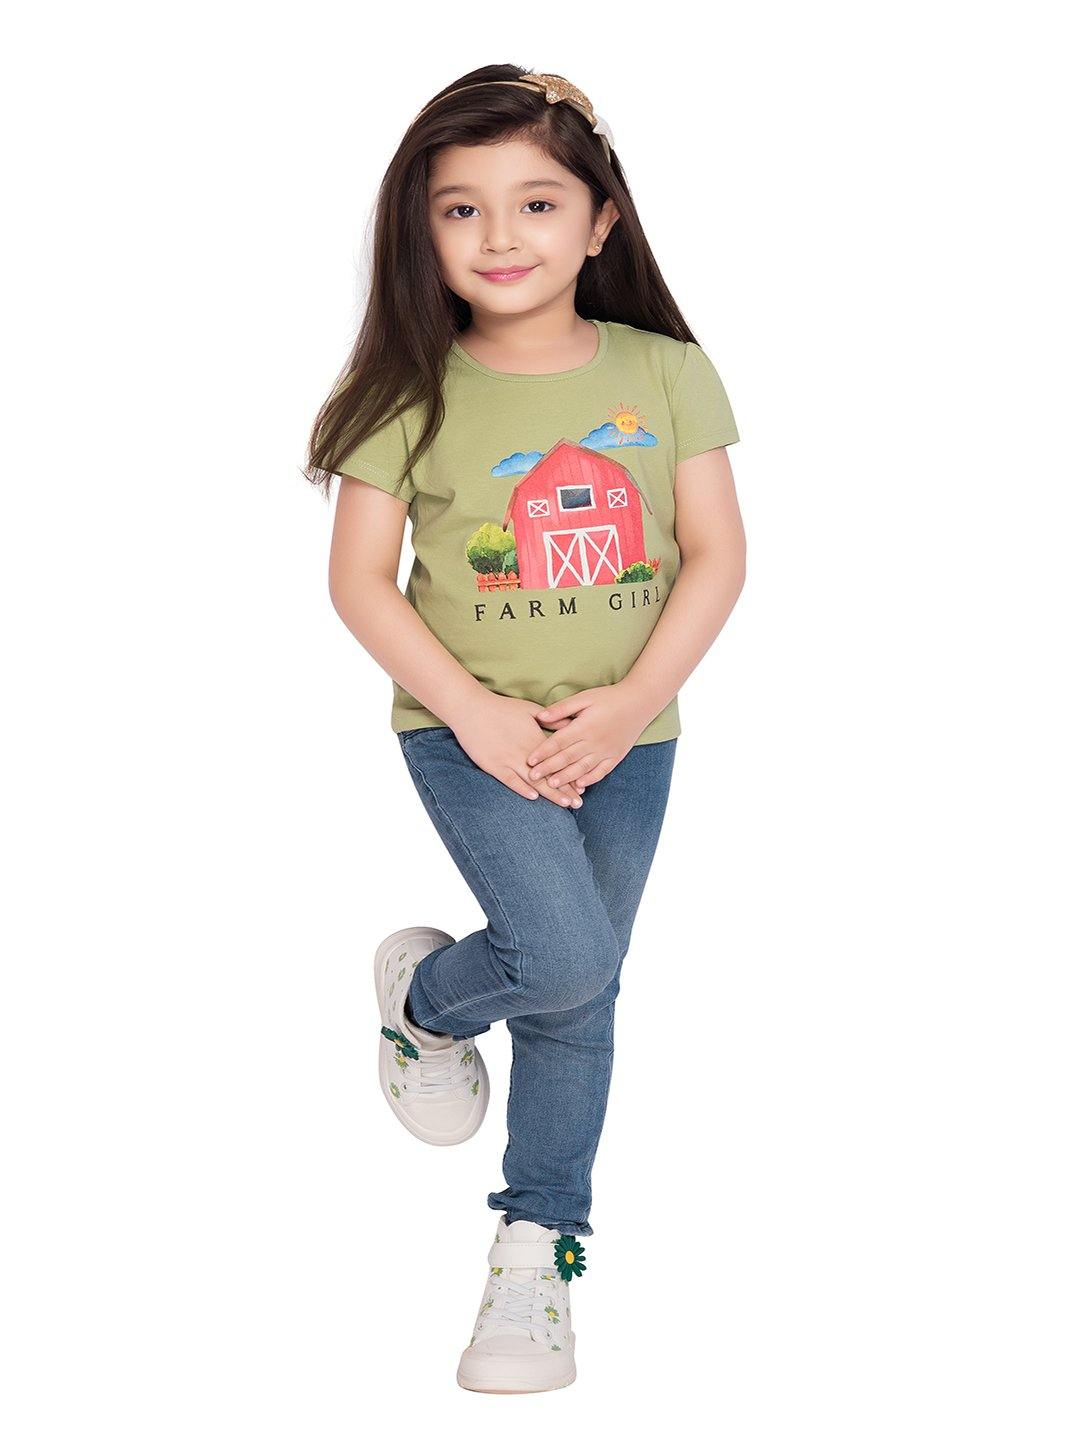 Tiny Baby Green Colored Top - T-106 Green - TINY BABY INDIA shop.tinybaby.in